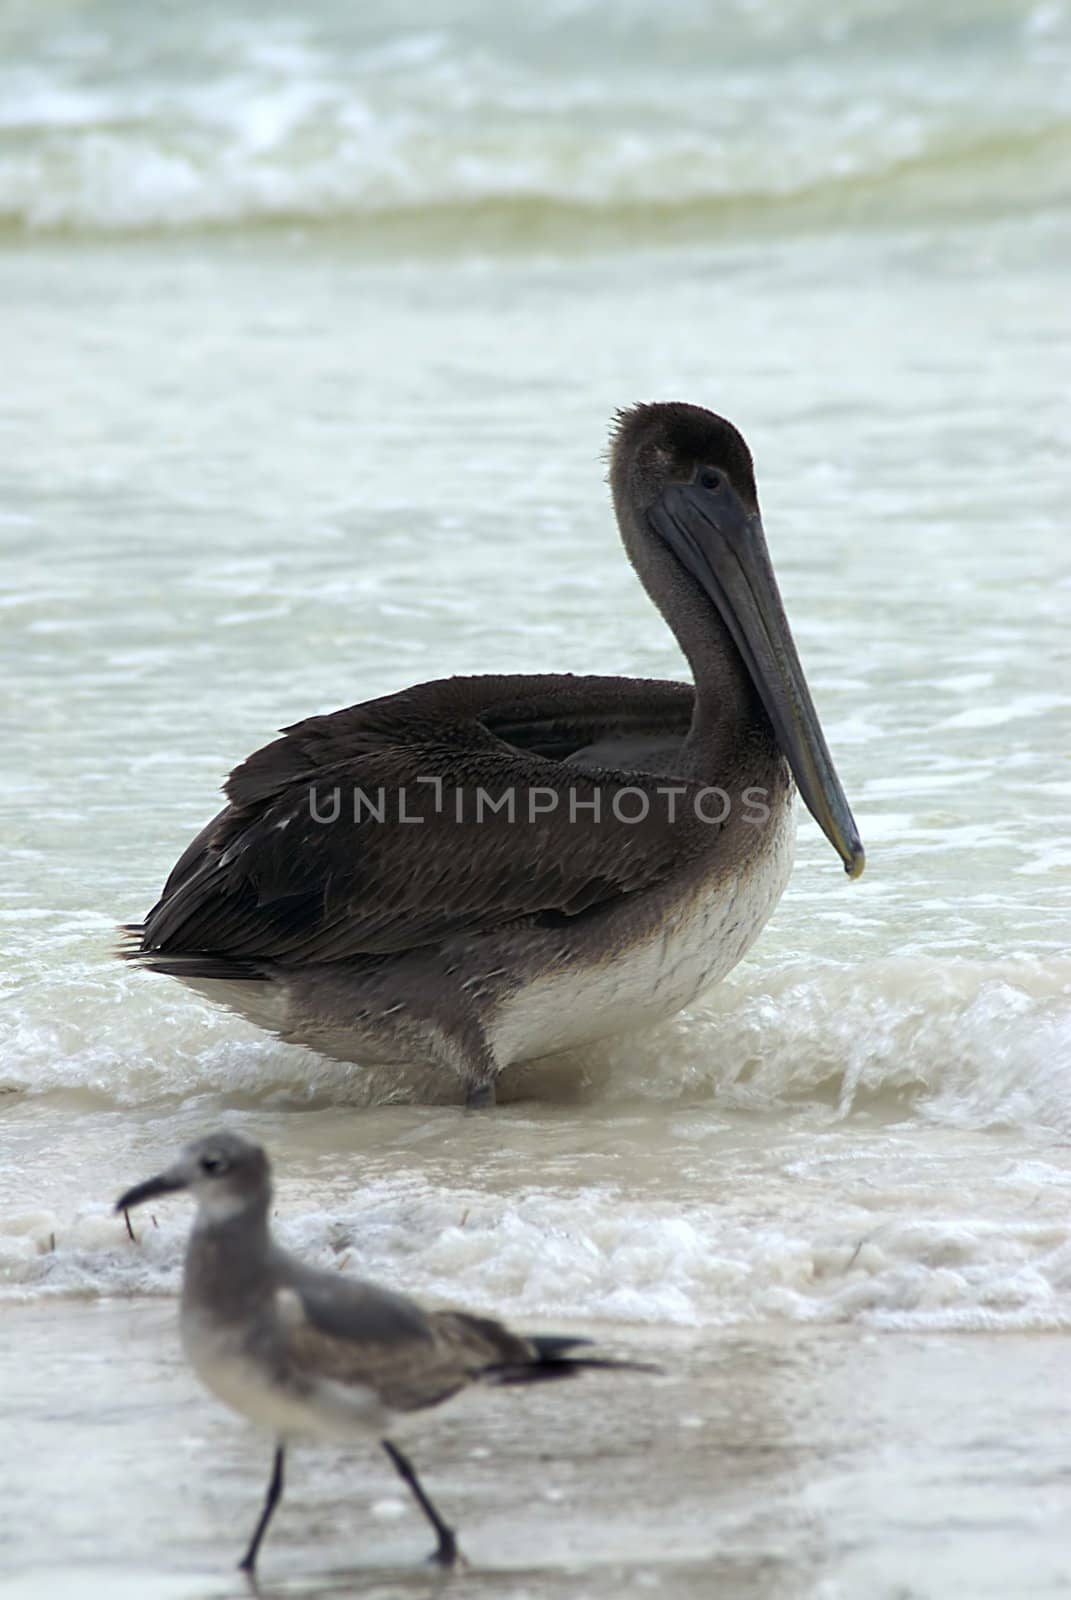 Pelican and Sandpiper by npologuy